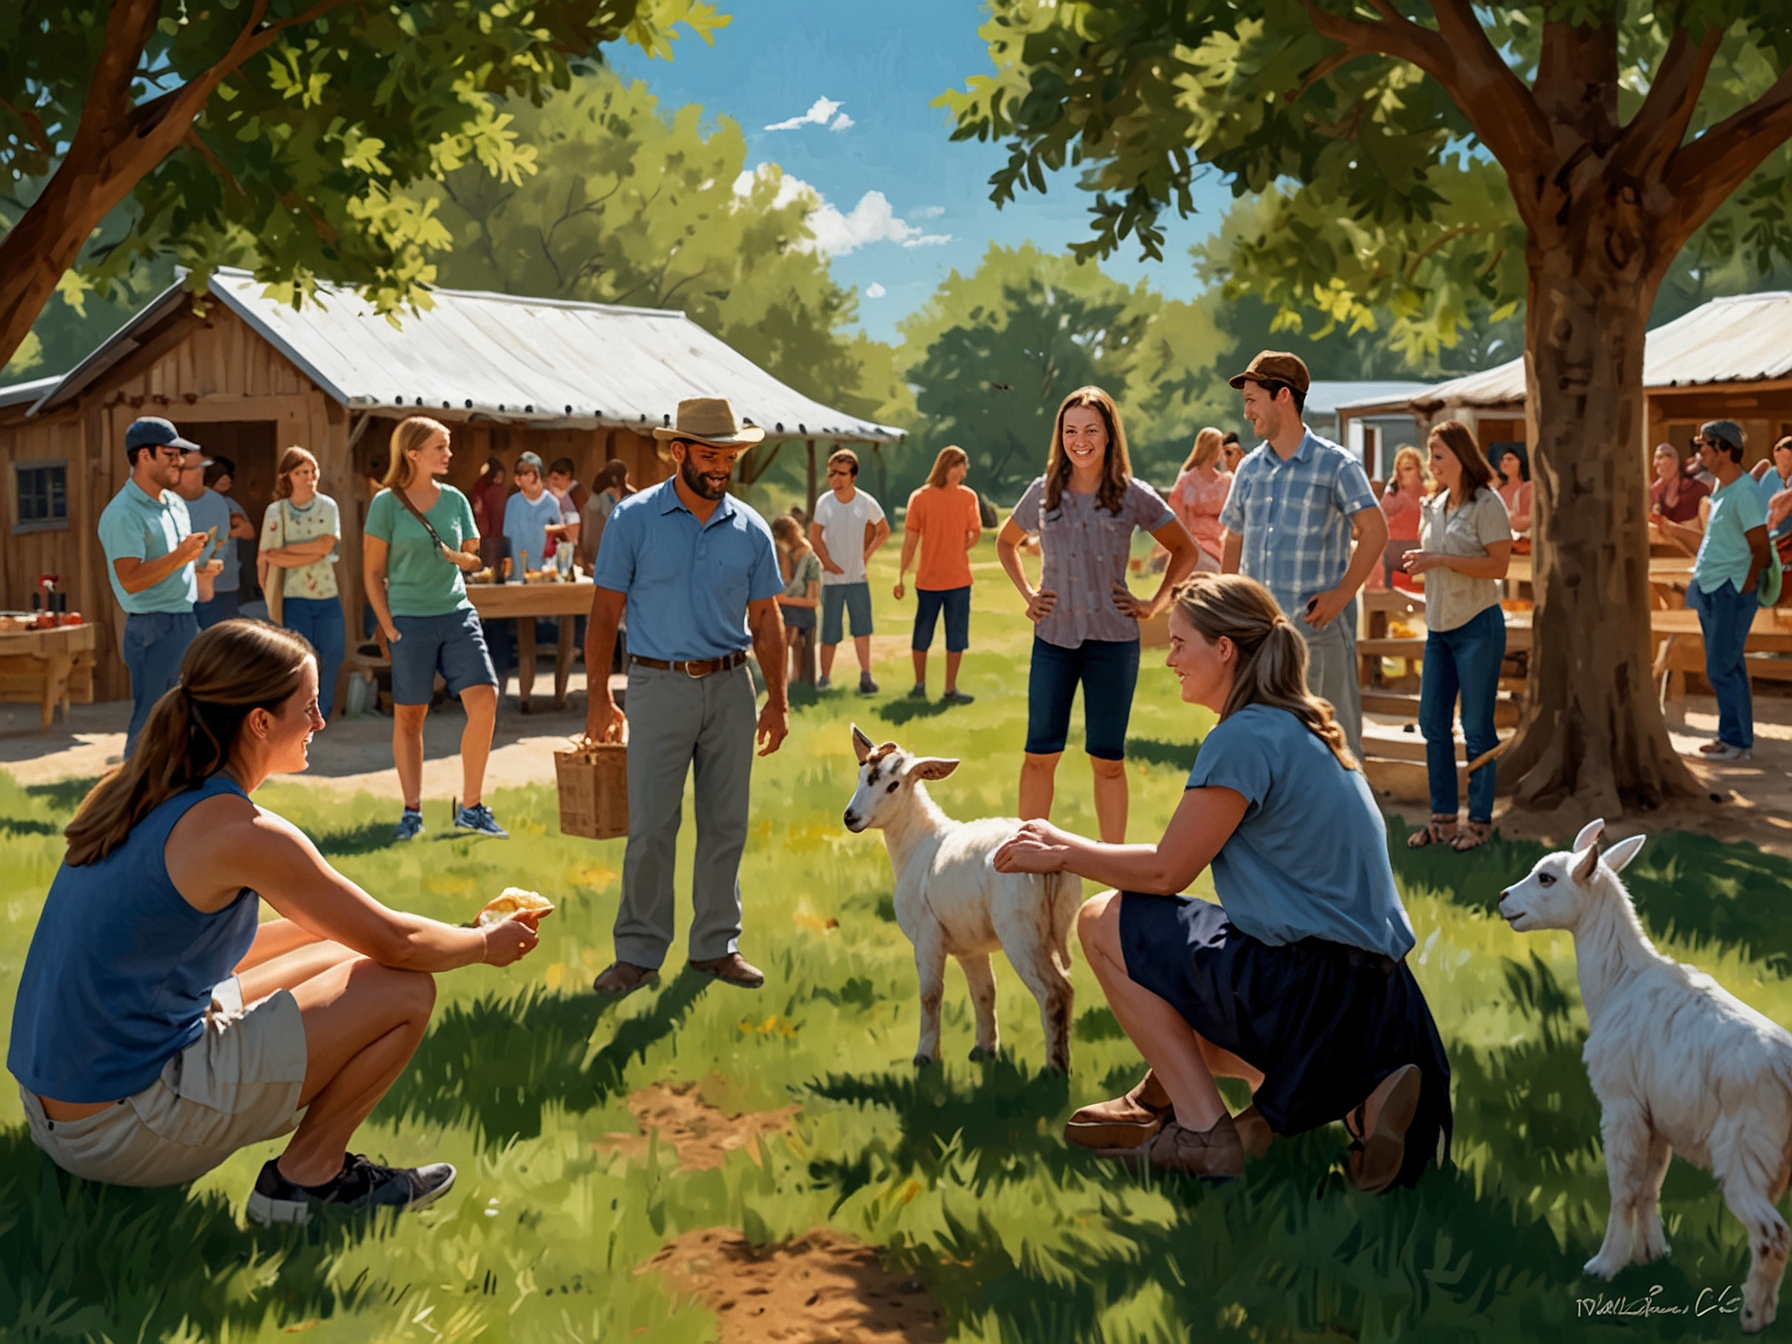 Children and adults gather in the shaded picnic area of Cajun Corral Farm, interacting with playful goats. These picnics offer educational sessions on goat care and sustainable farming practices.